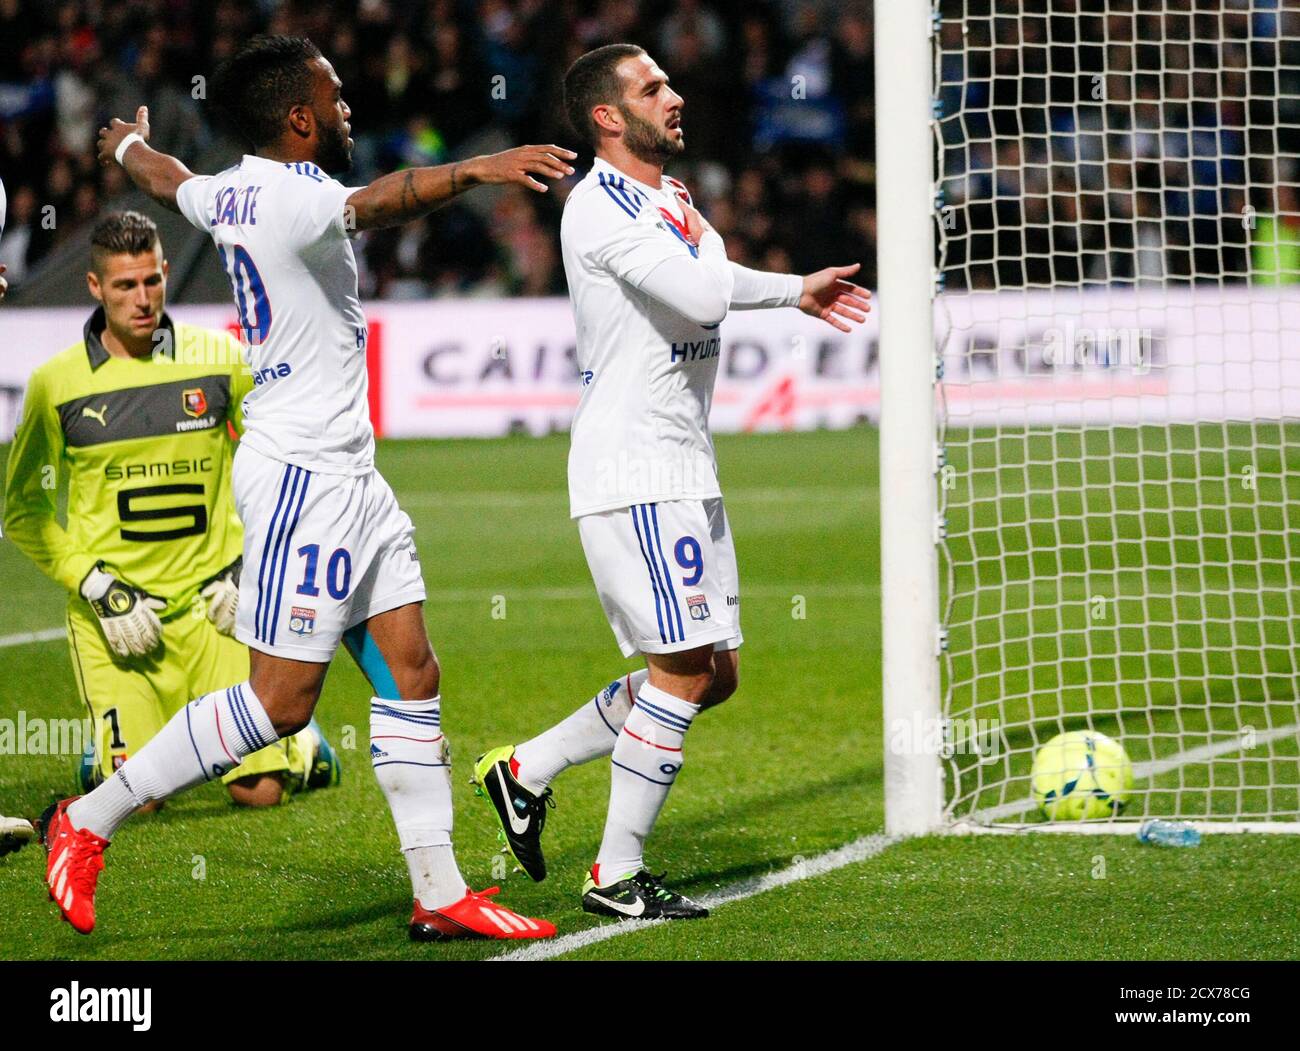 Olympique Lyon's Lisandro Lopez (R) celebrates his goal with team mate  Alexandre Lacazette (C) against Stade Rennais's goal keeper Benoit Costil  (L) during their French Ligue 1 soccer match at the Stade